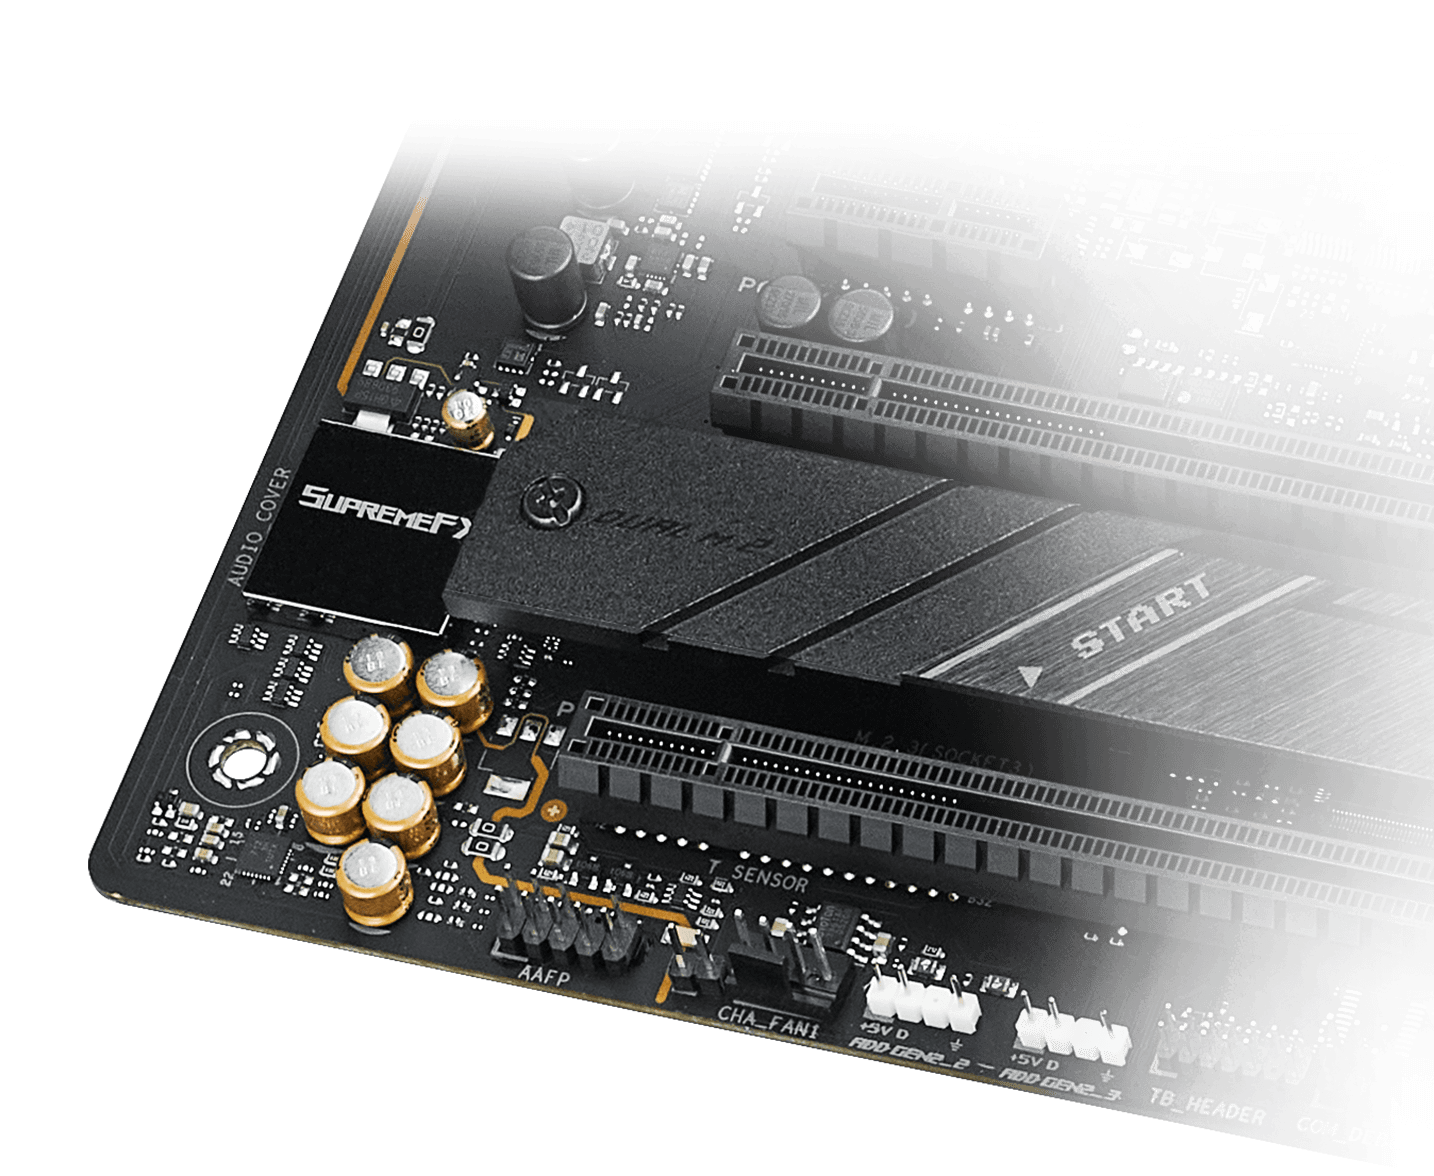 The ROG Strix Z790-F motherboard features SupremeFX audio